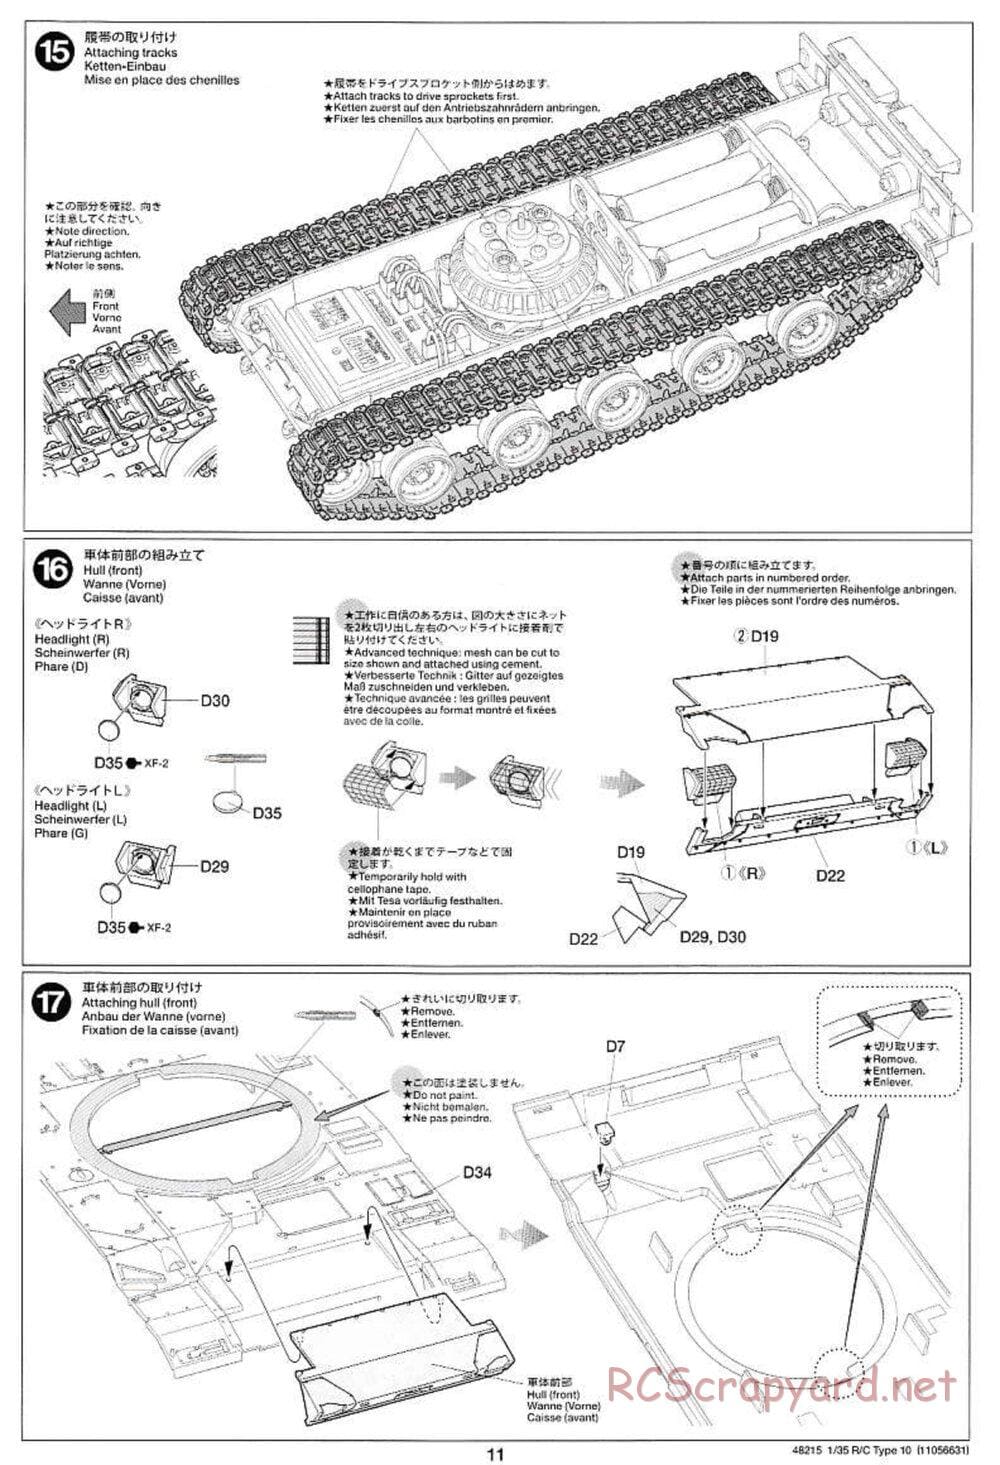 Tamiya - JGSDF Type 10 Tank - 1/35 Scale Chassis - Manual - Page 11